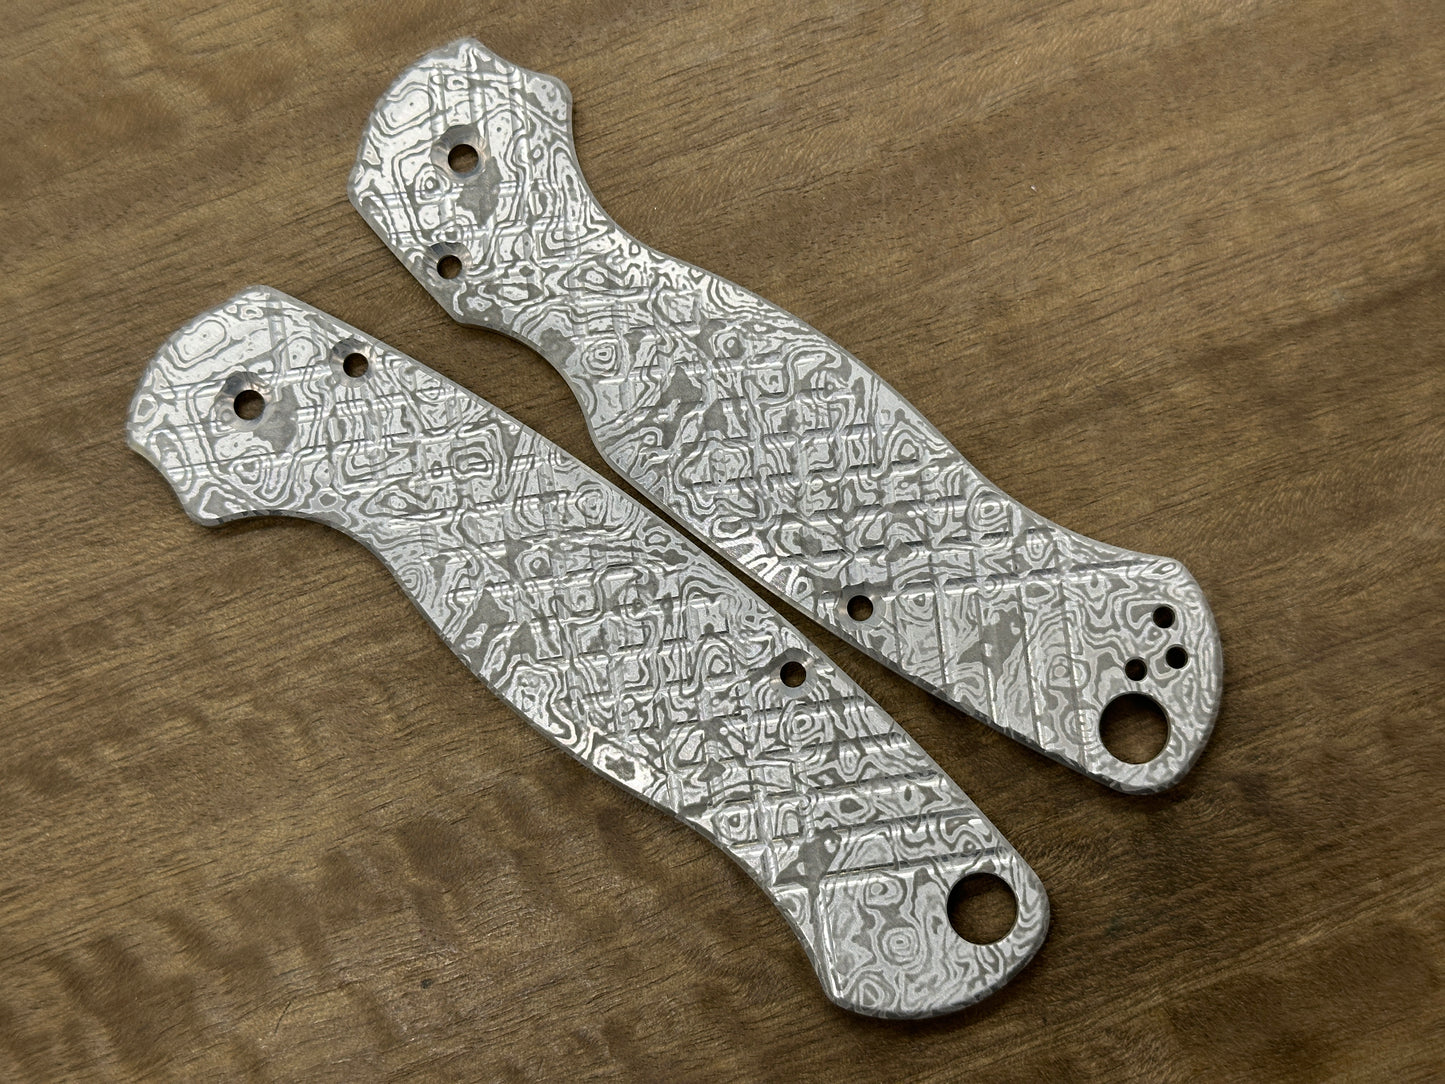 ALIEN FRAG milled Aerospace Aluminum scales for Spyderco Paramilitary 2 PM2